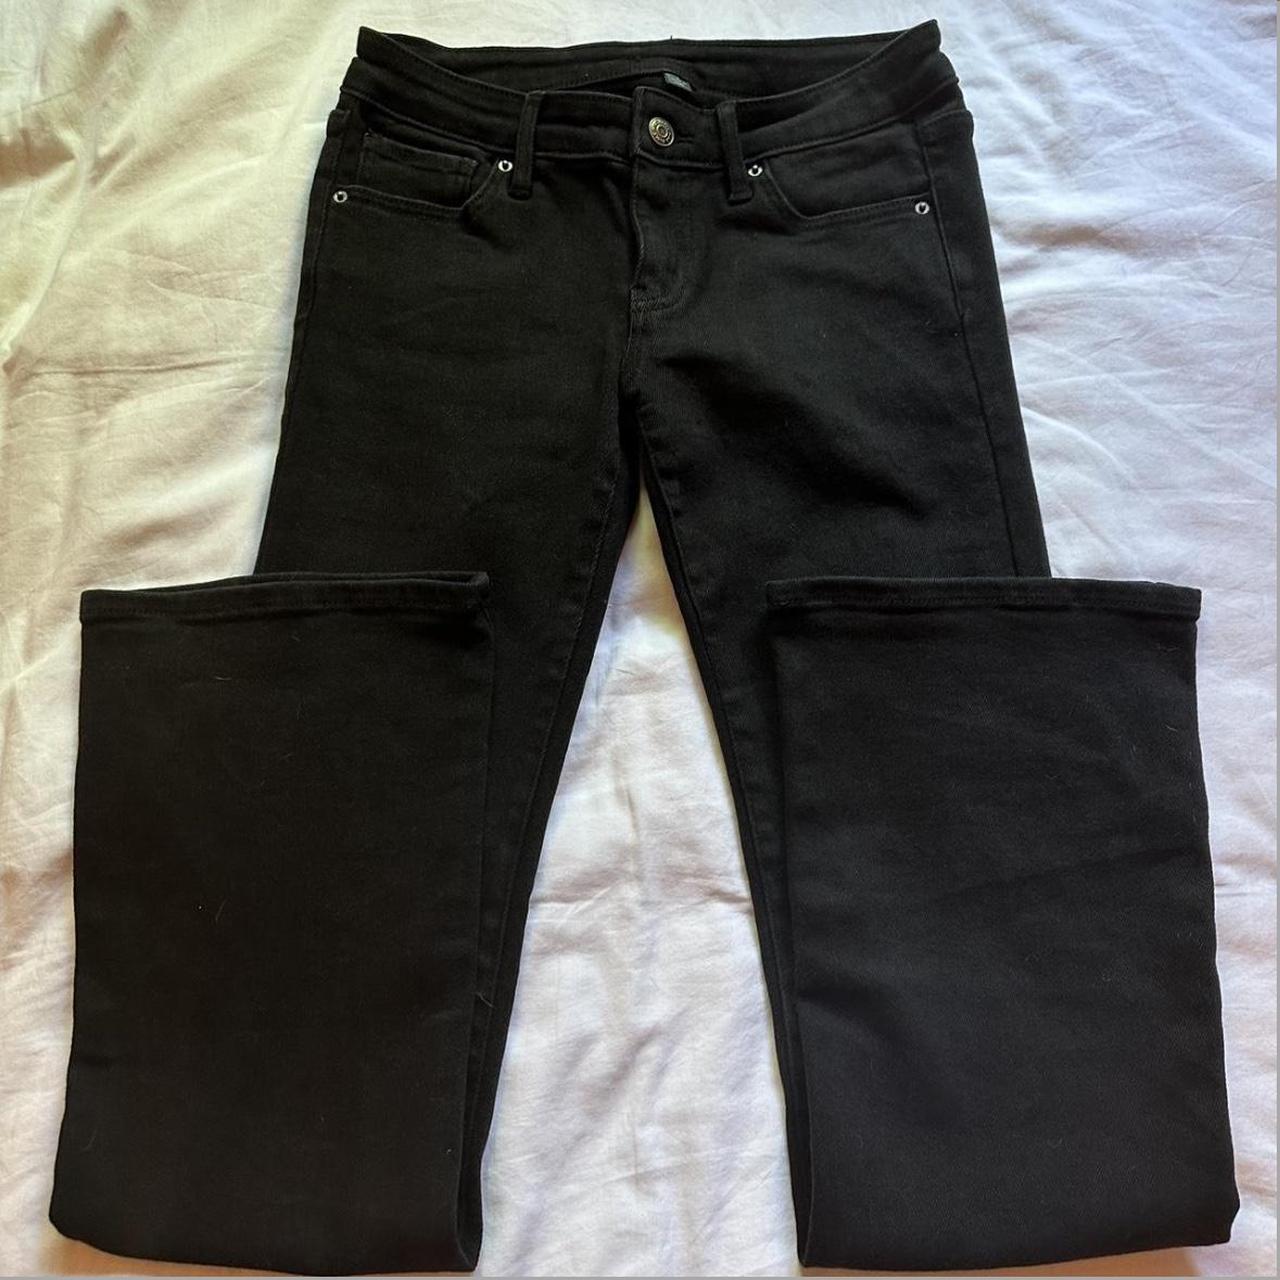 Low Rise Flare Black Jeans never been worn before,... - Depop